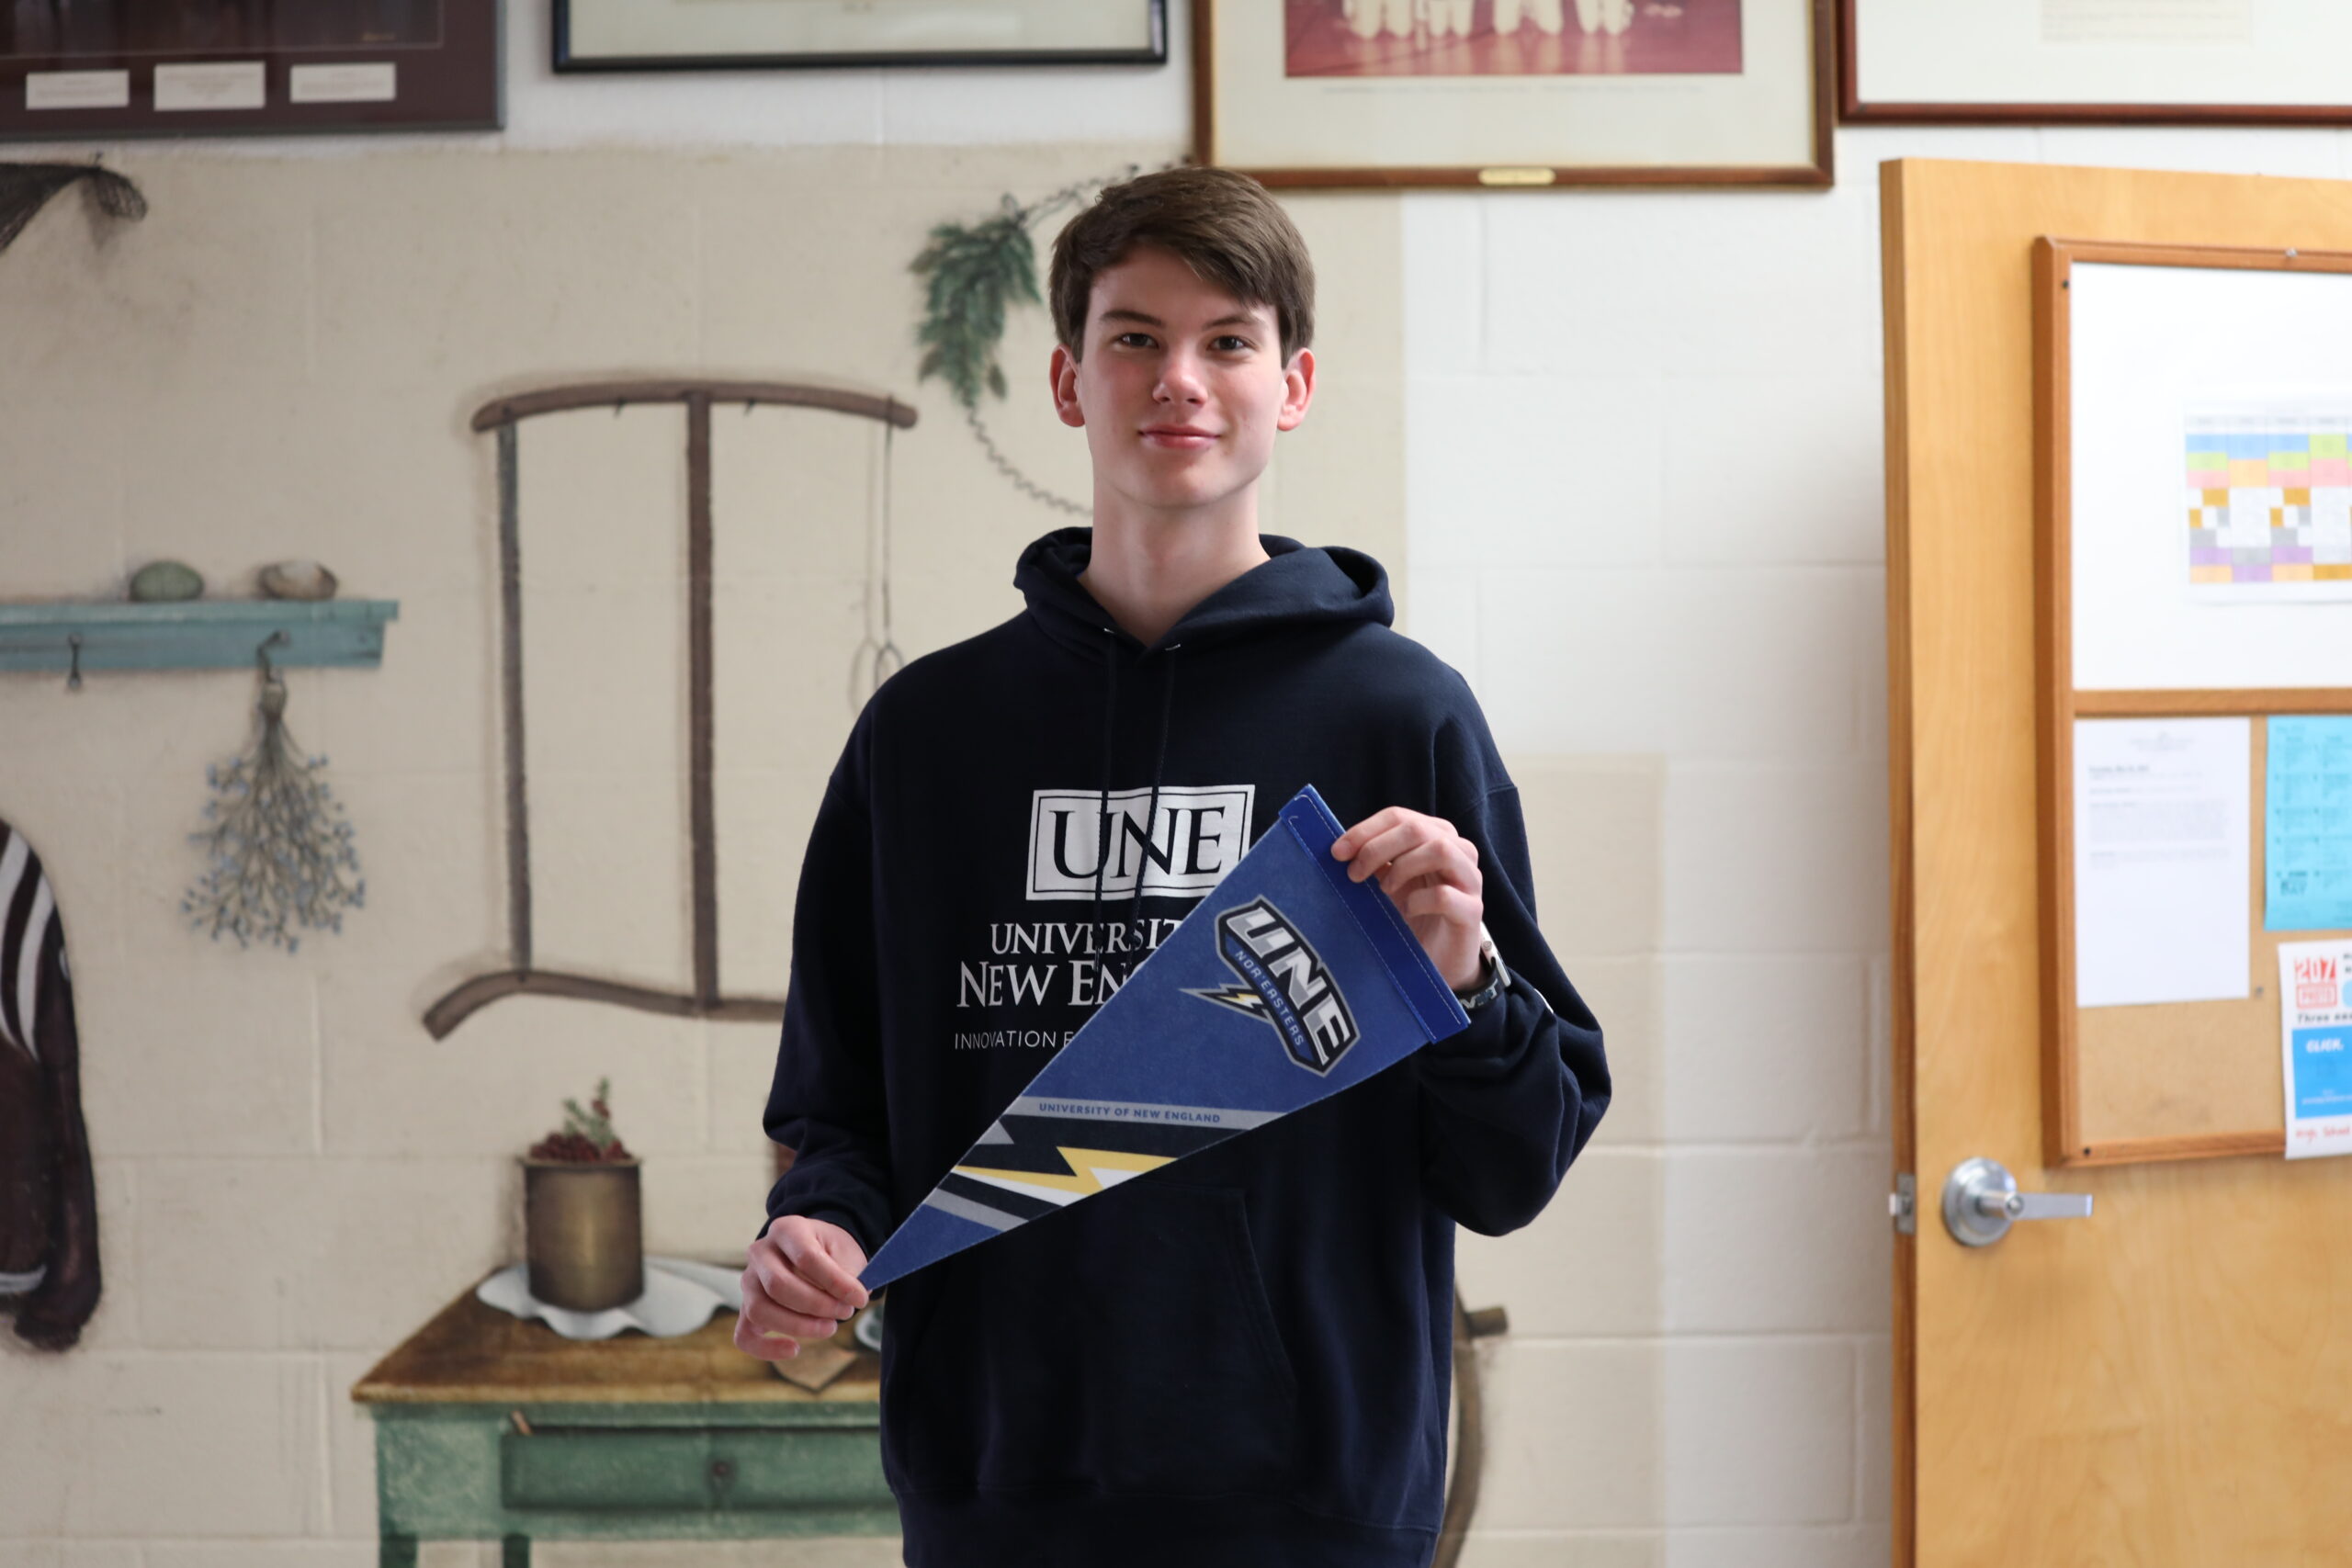 A photo of a young smiling white man holding a college pennant that says UNE